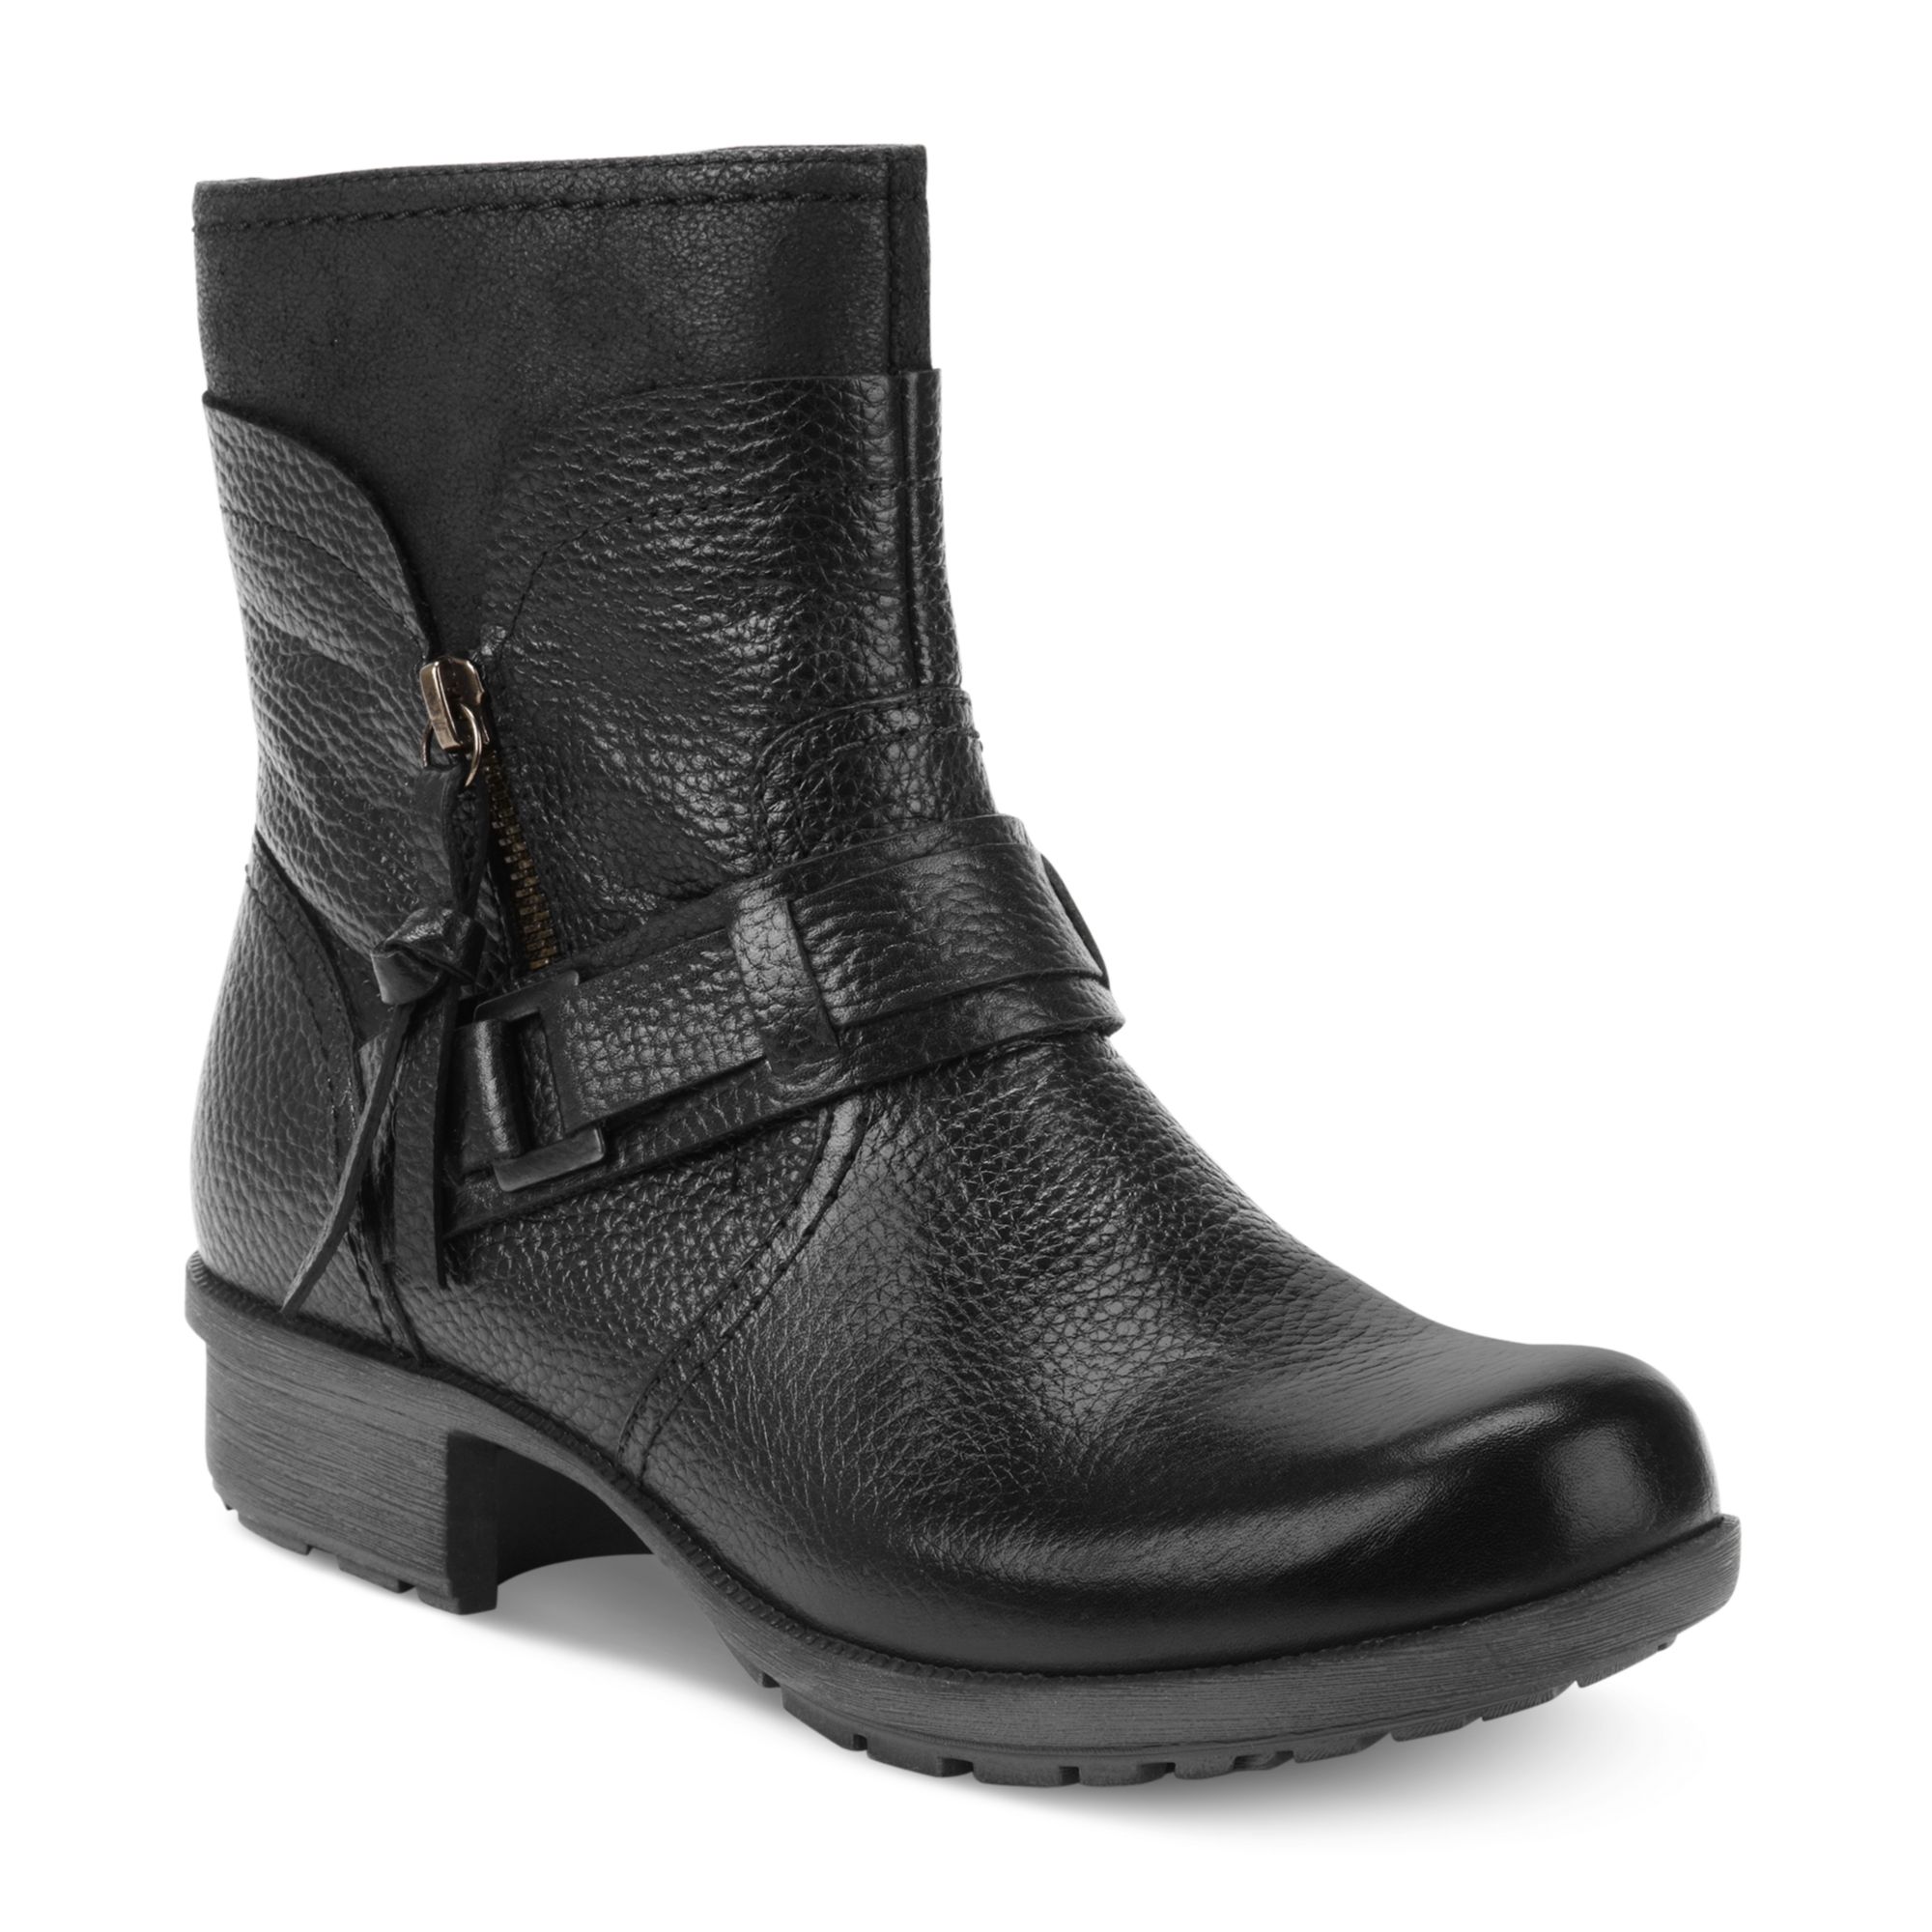 Lyst - Clarks Riddle Avant Casual Boots in Black